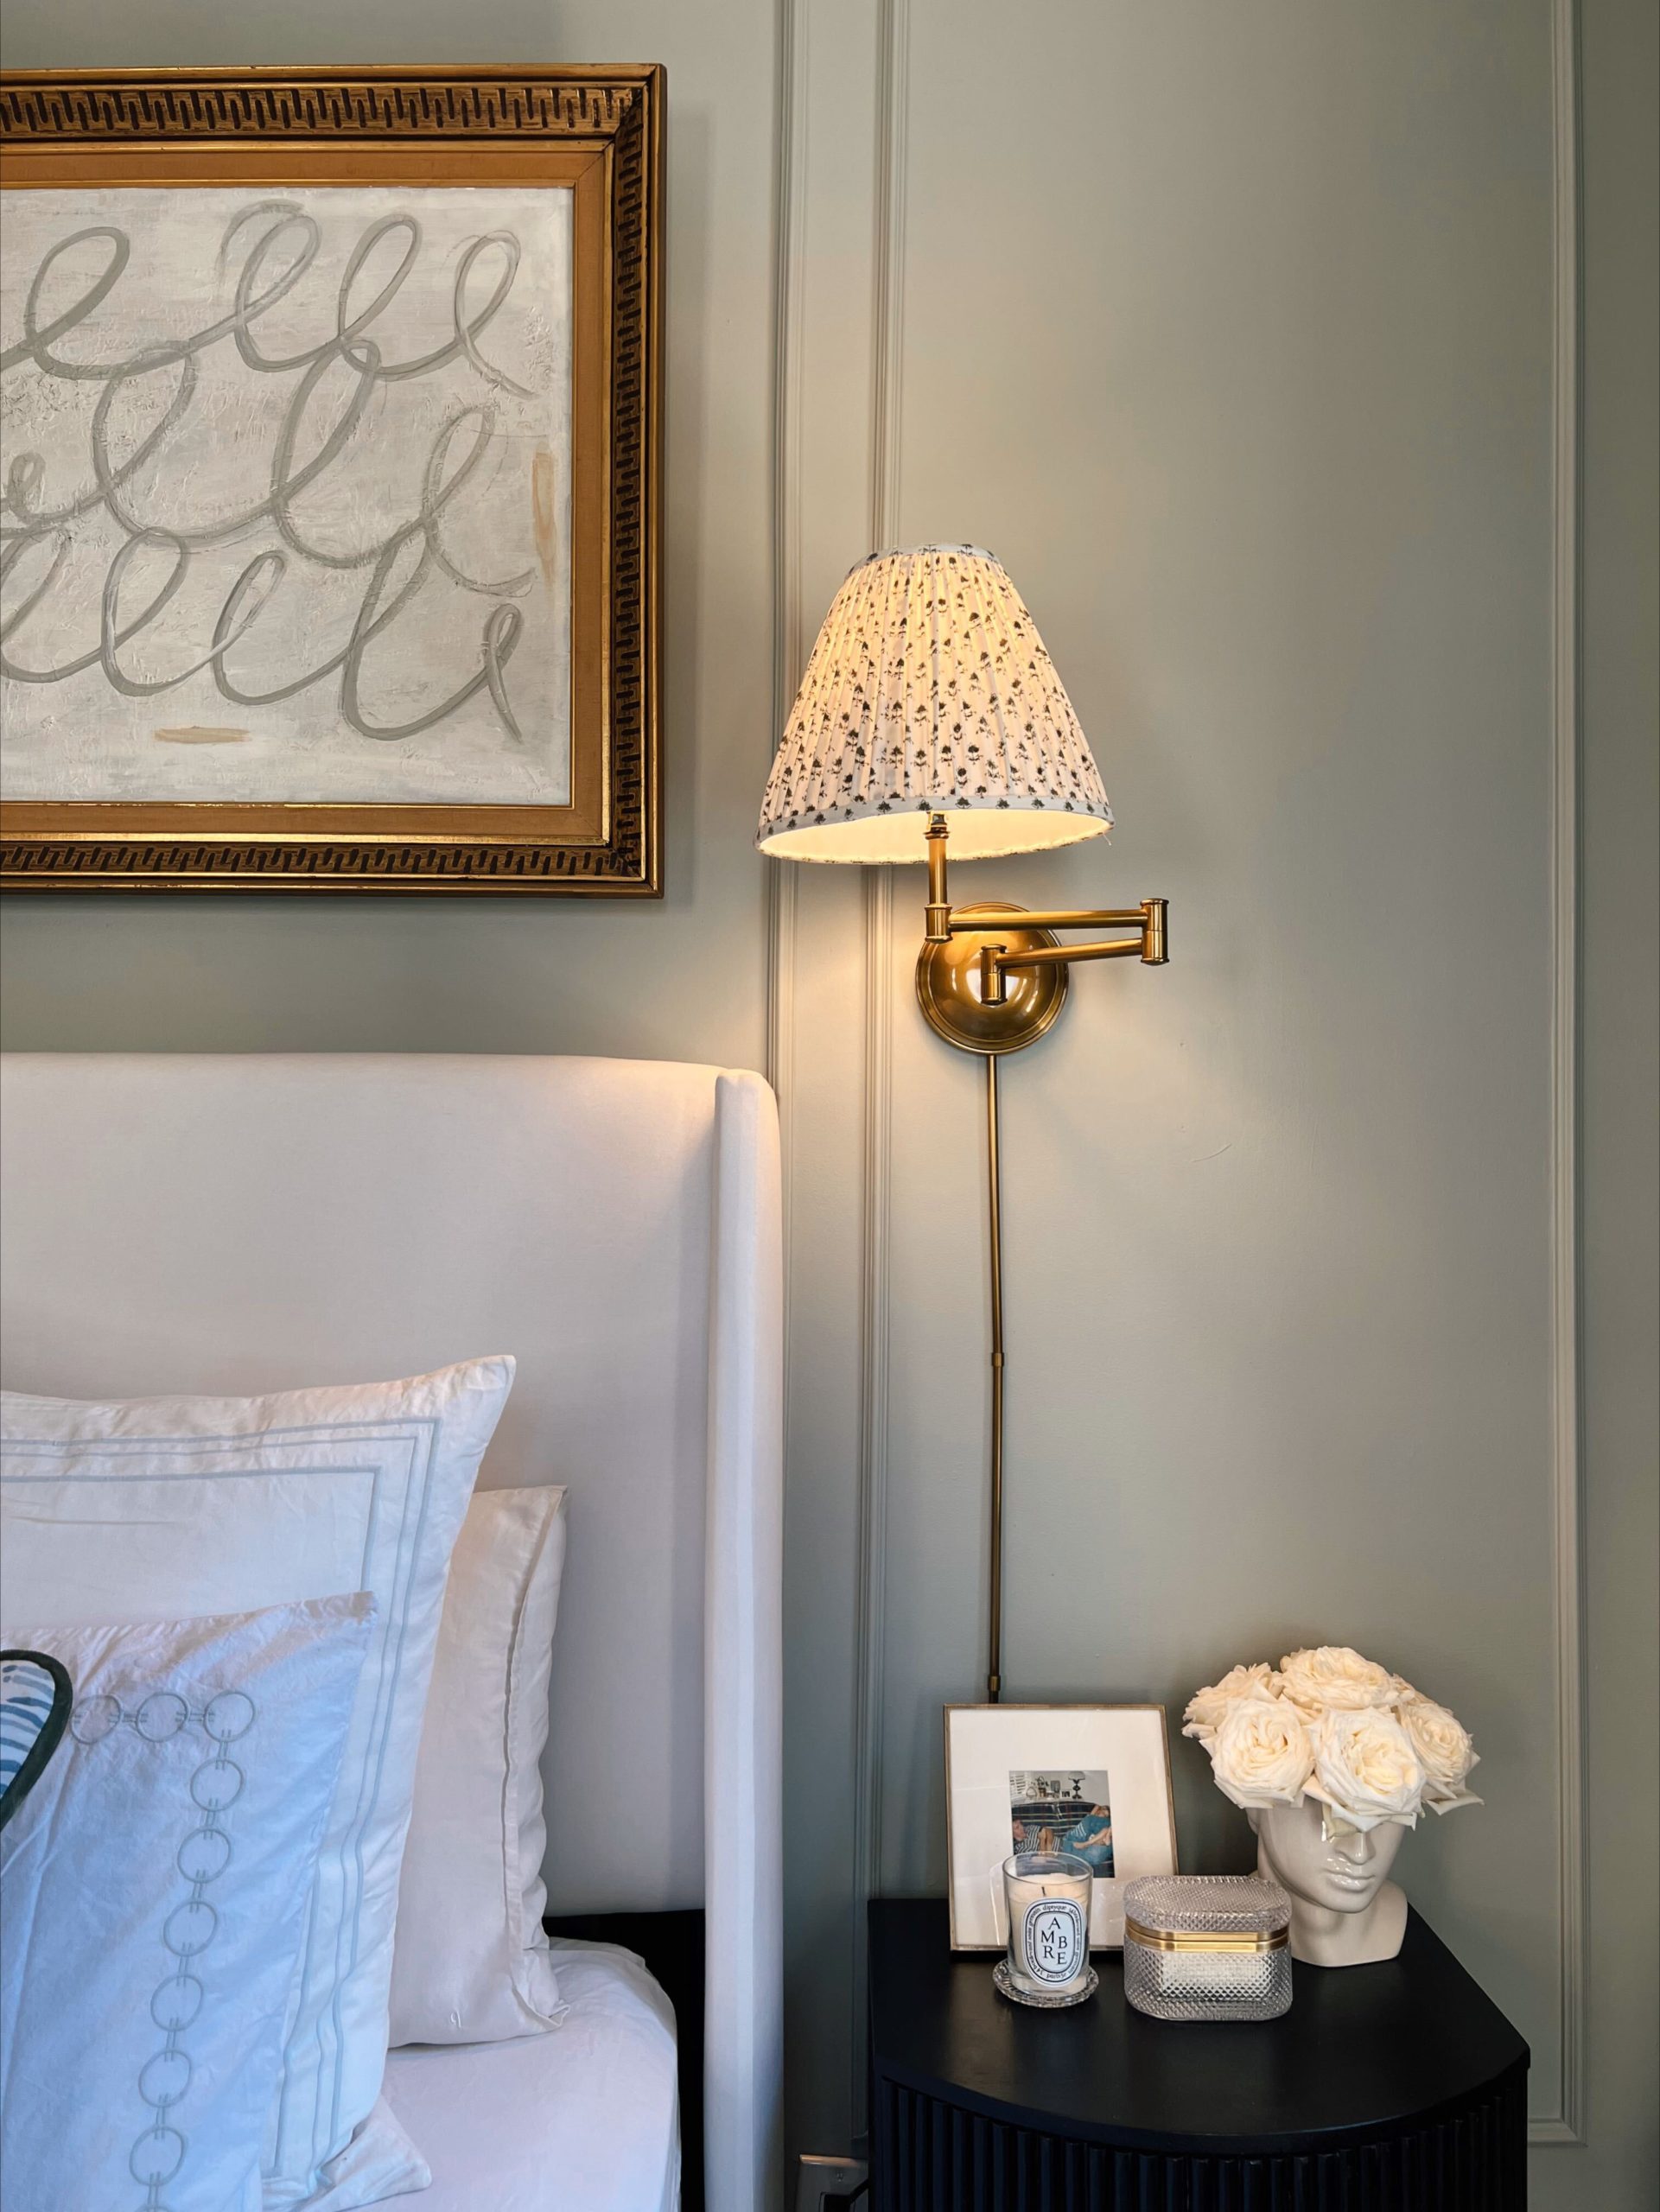 Sconce and DIY art in NYC apartment bedroom.